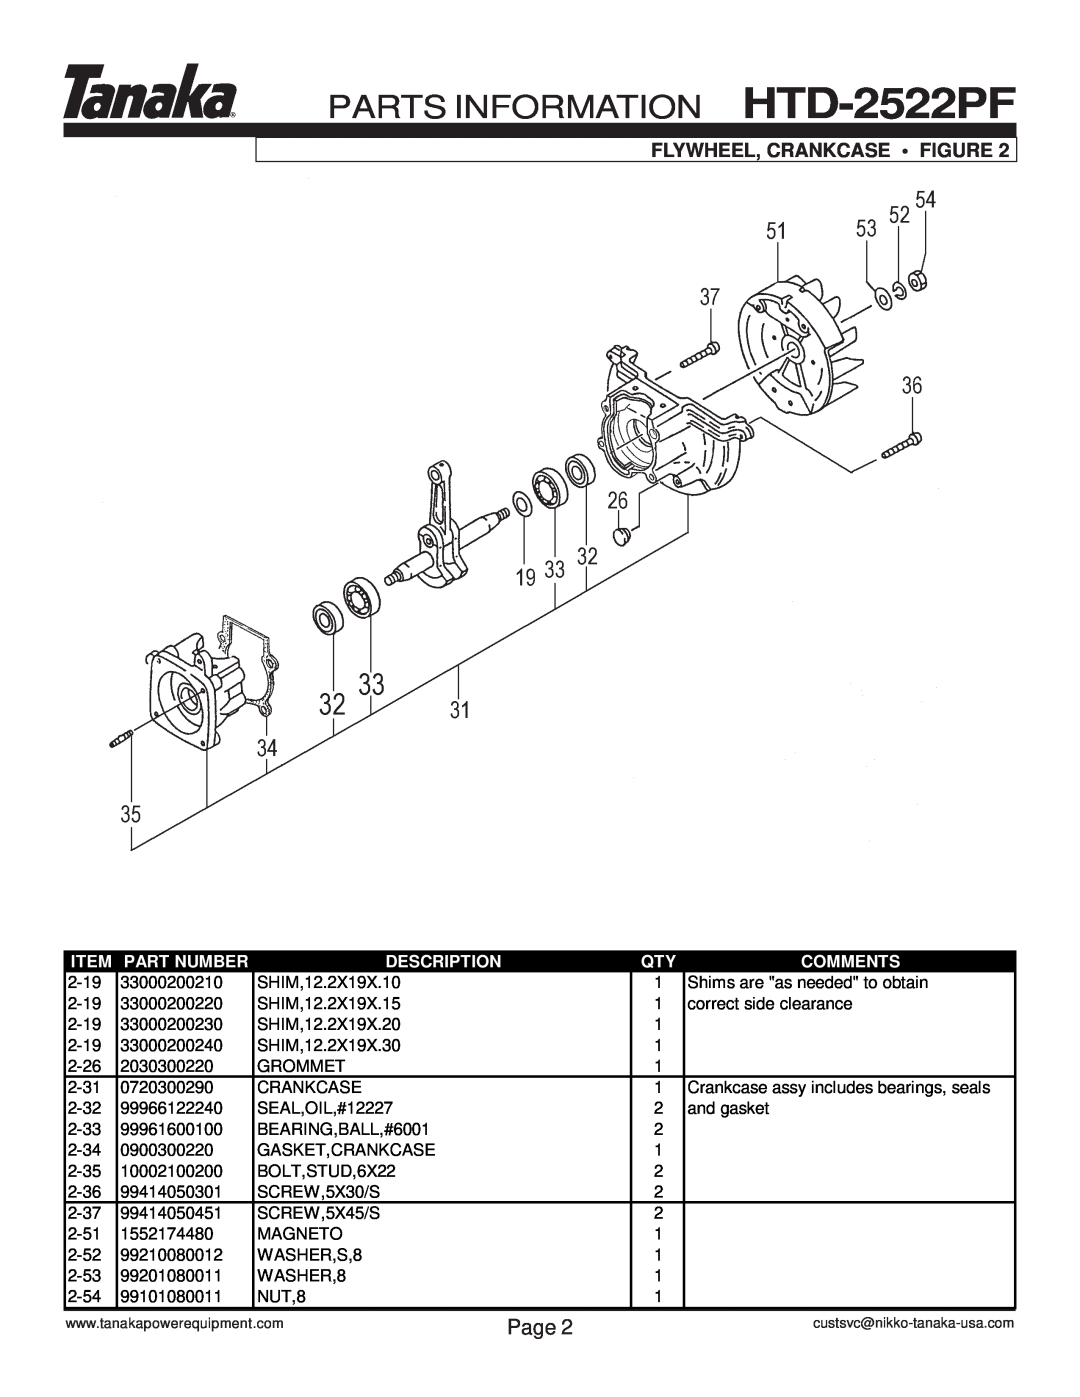 Tanaka manual Flywheel, Crankcase Figure, PARTS INFORMATION HTD-2522PF, Page, Part Number, Description, Comments 